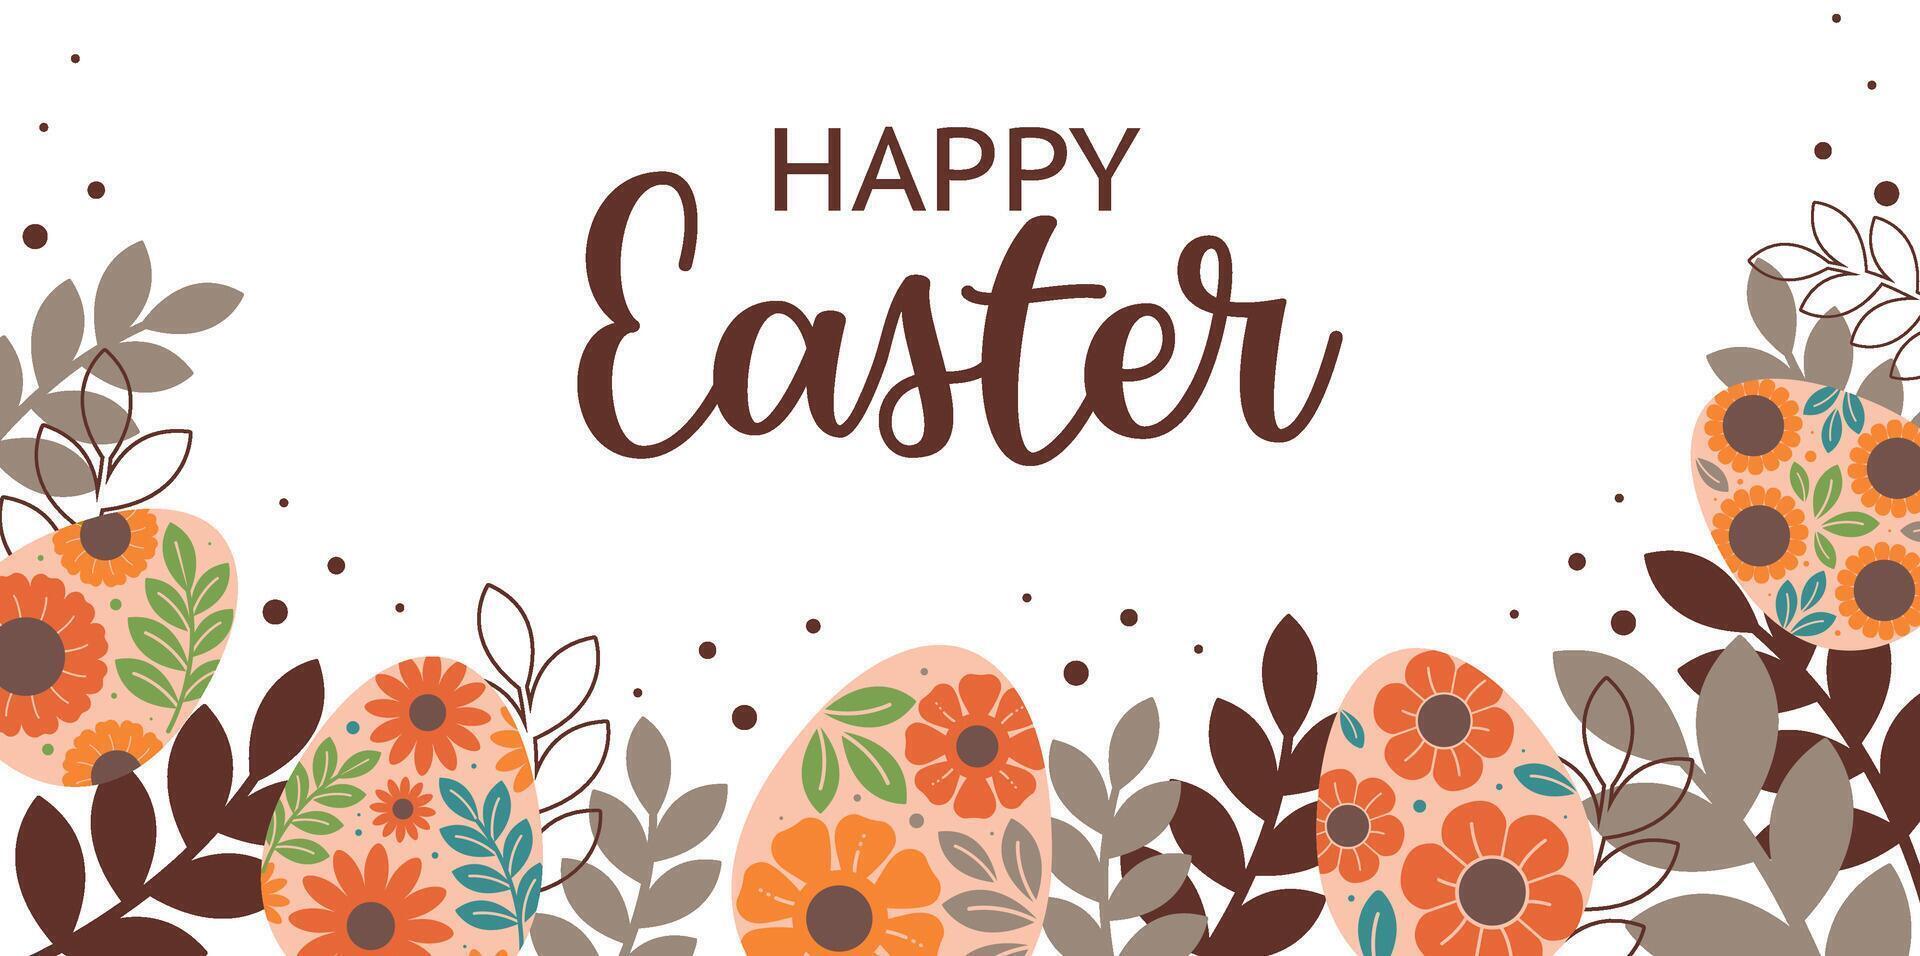 Benner for Happy Easter with eggs, flowers leaves and lettering vector